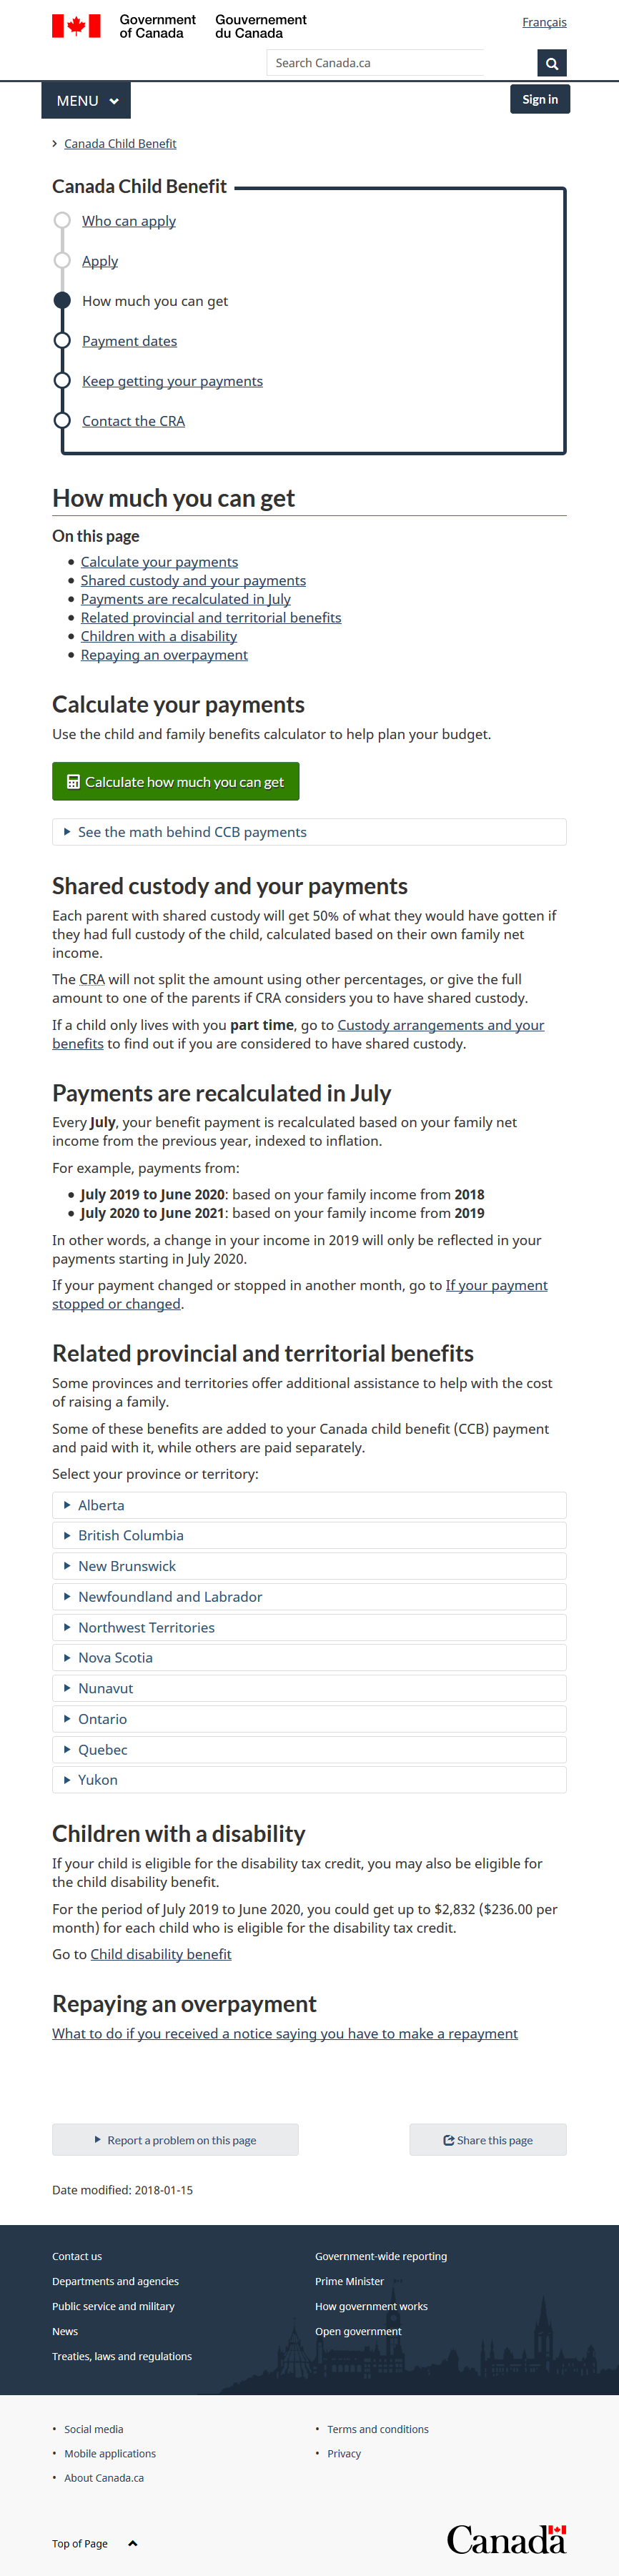 Canada Child Benefit: How much you can get page with new service initiation template in medium viewport showing navigation vertically